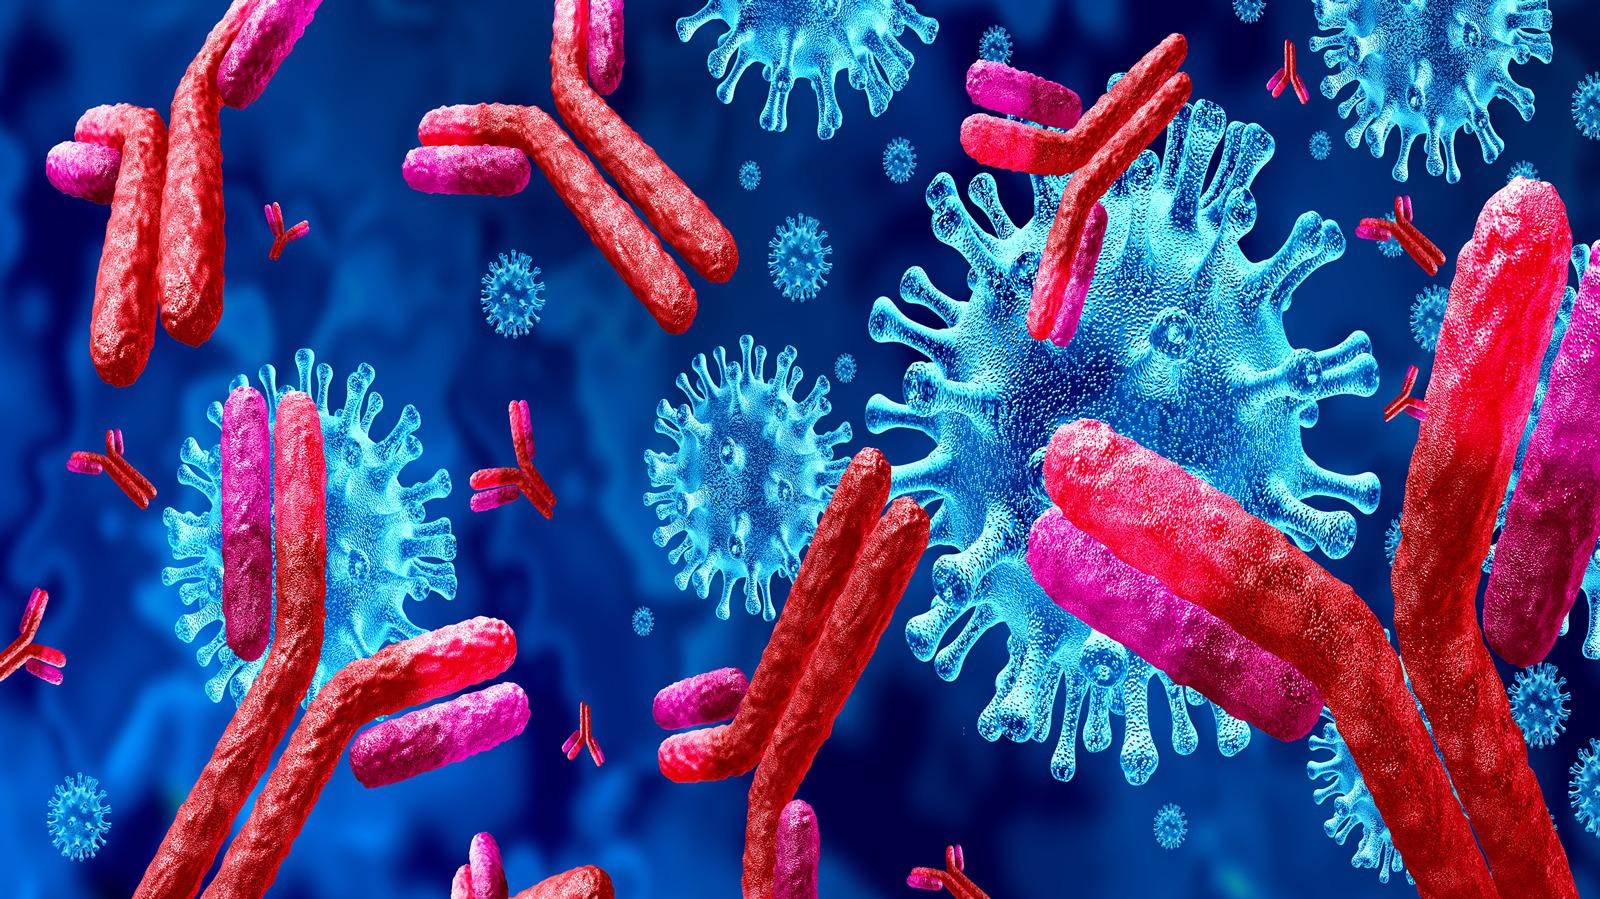 Study: SARS-CoV-2 Convalescent Sera Binding and Neutralizing Antibody Concentrations Compared with COVID-19 Vaccine Efficacy Estimates Against Symptomatic Infection. Image Credit: Lightspring / Shutterstock